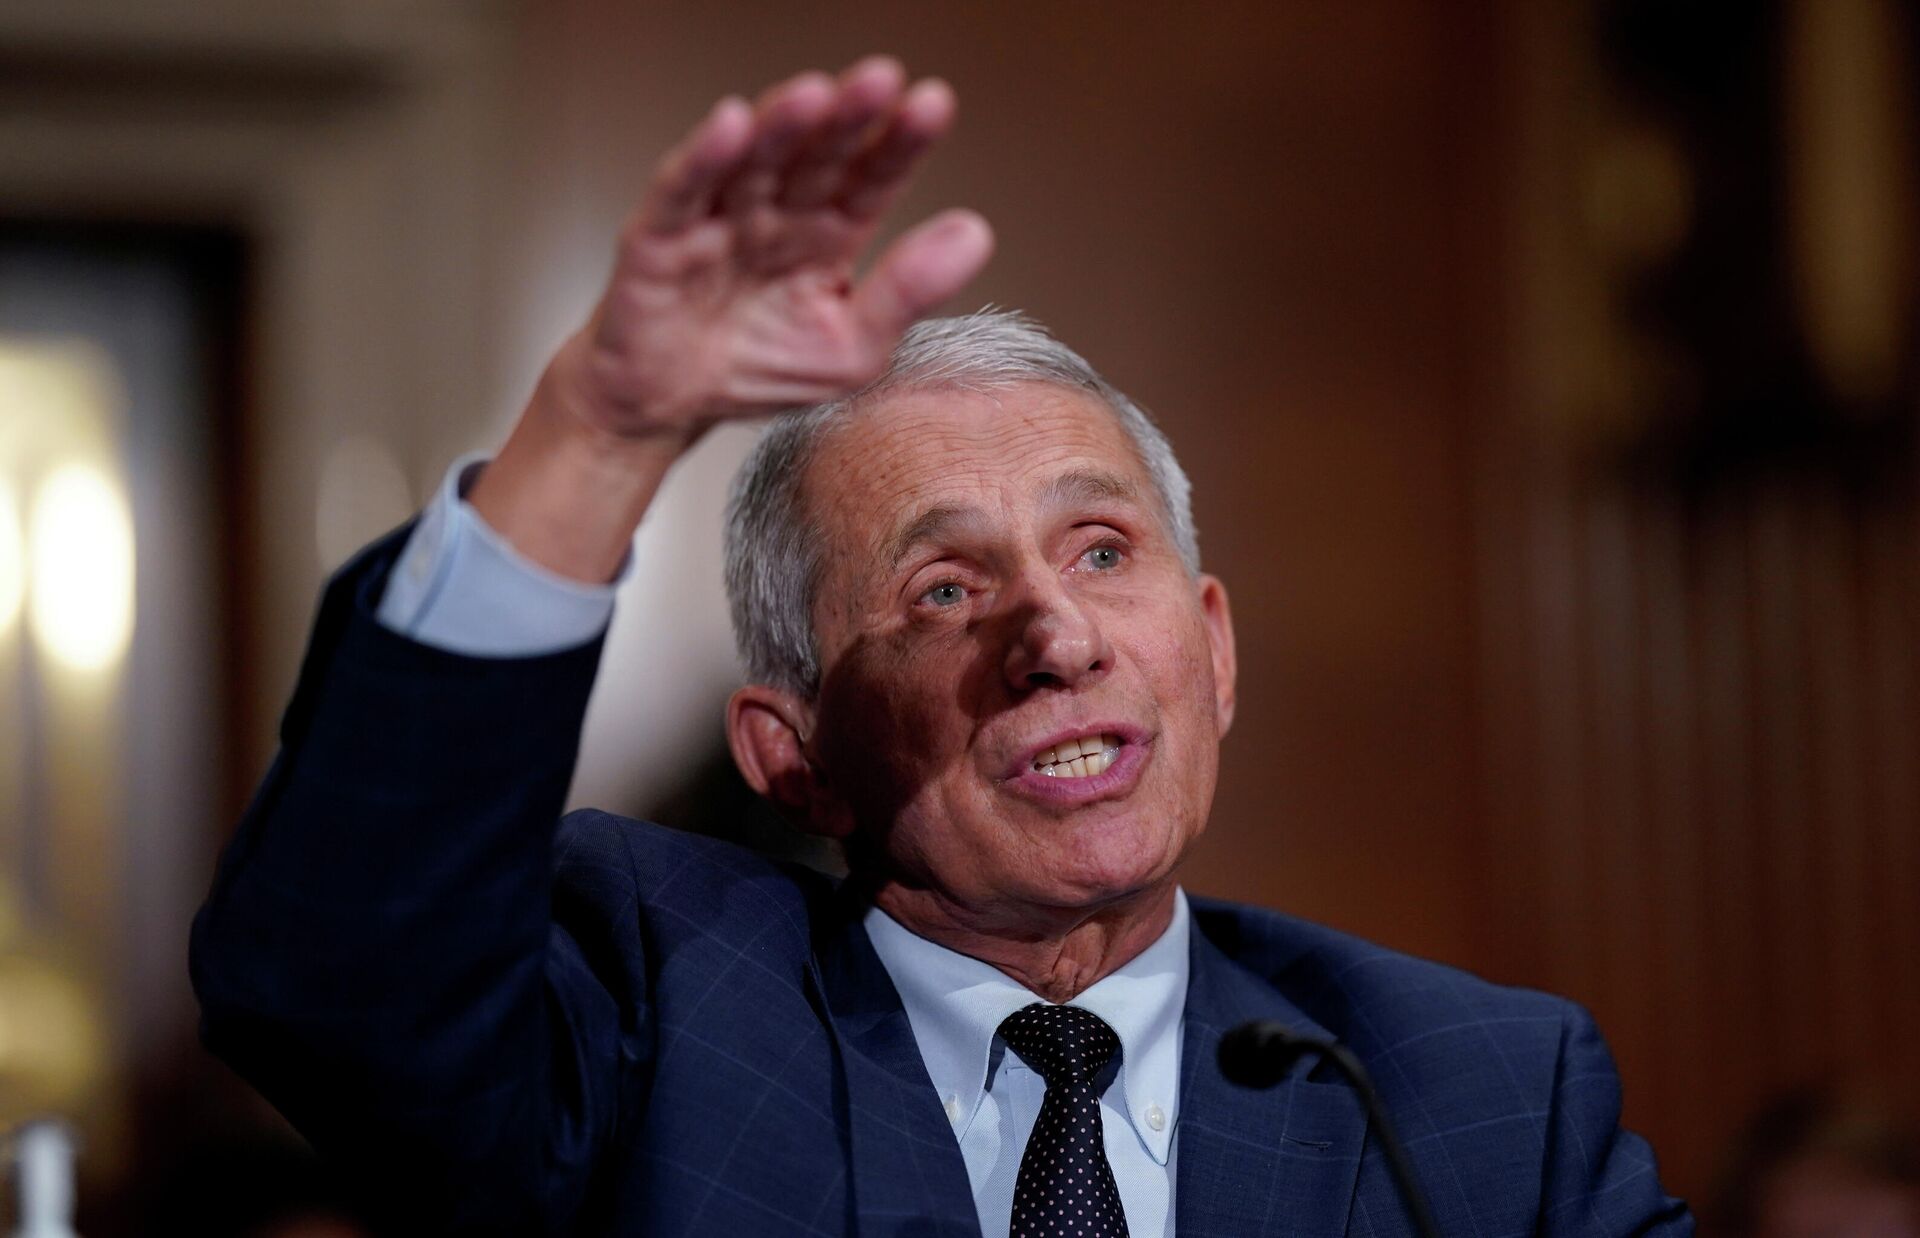 Top infectious disease expert Dr. Anthony Fauci testifies before the Senate Health, Education, Labor, and Pensions Committee on Capitol hill in Washington, D.C., U.S., July 20, 2021 - Sputnik International, 1920, 09.09.2021